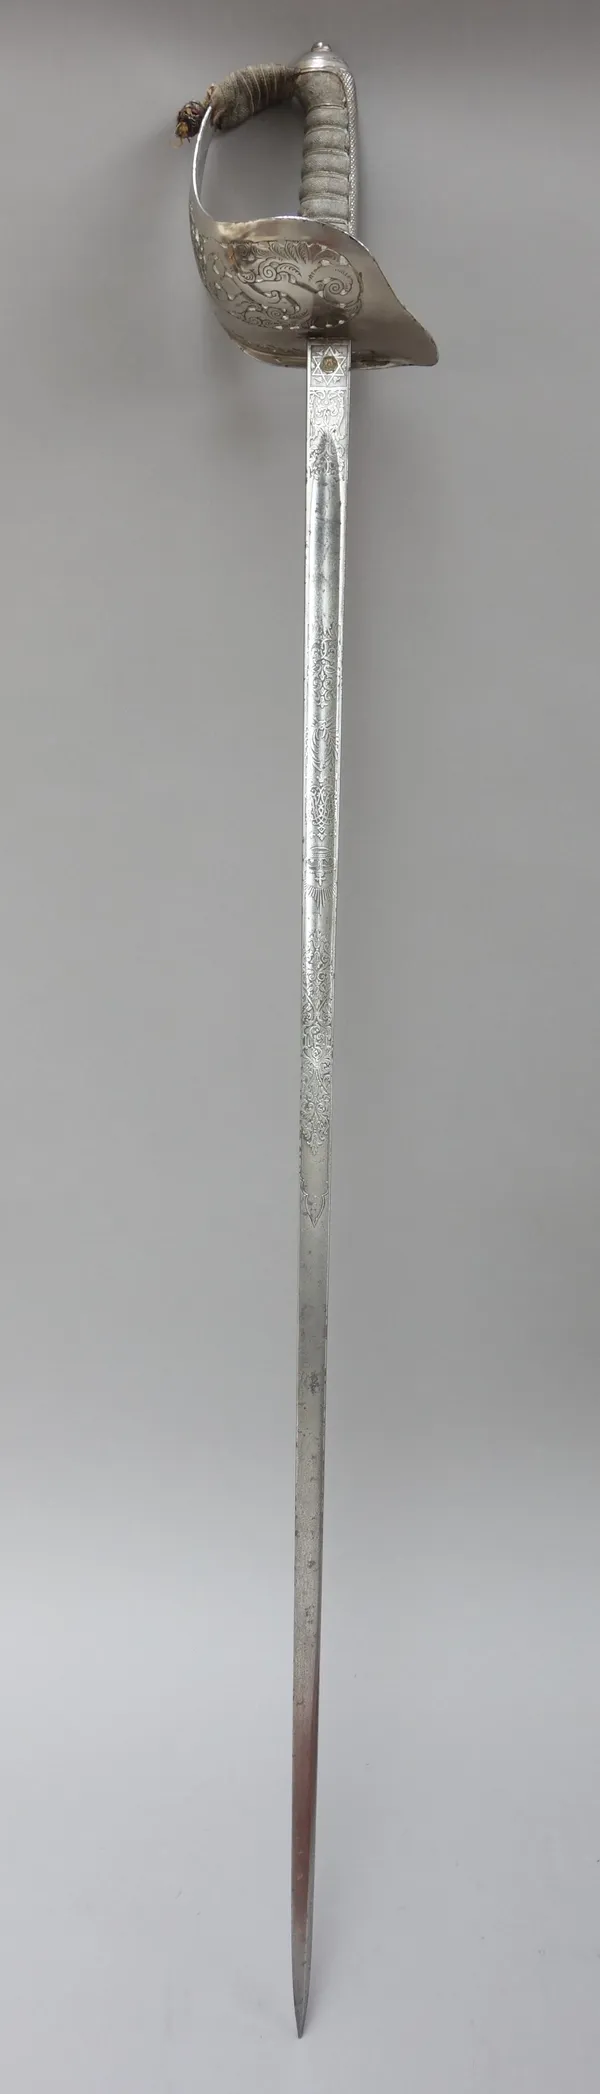 A Victorian officer's dress sword by 'E. THURKLE', 5 DENMARK St, SOHO, LONDON' with engraved straight blade (84cm), pierced steel hilt with 'VR' cyphe